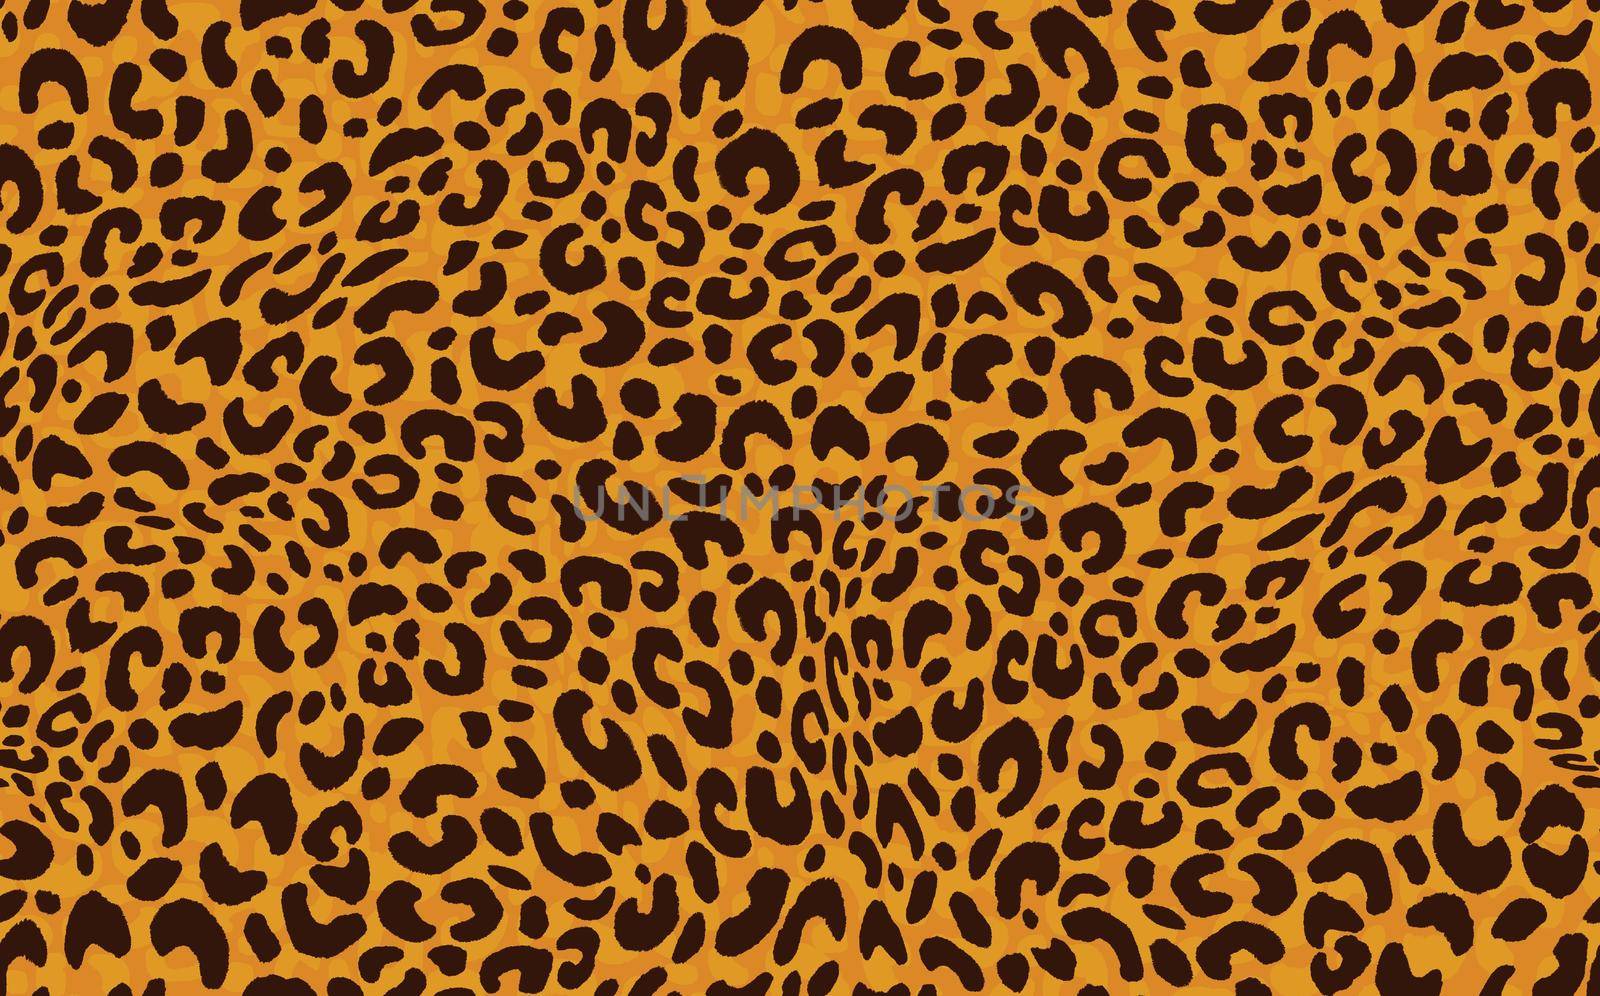 Abstract modern leopard seamless pattern. Animals trendy background. Orange and brown decorative vector stock illustration for print, card, postcard, fabric, textile. Modern ornament of stylized skin. by allaku